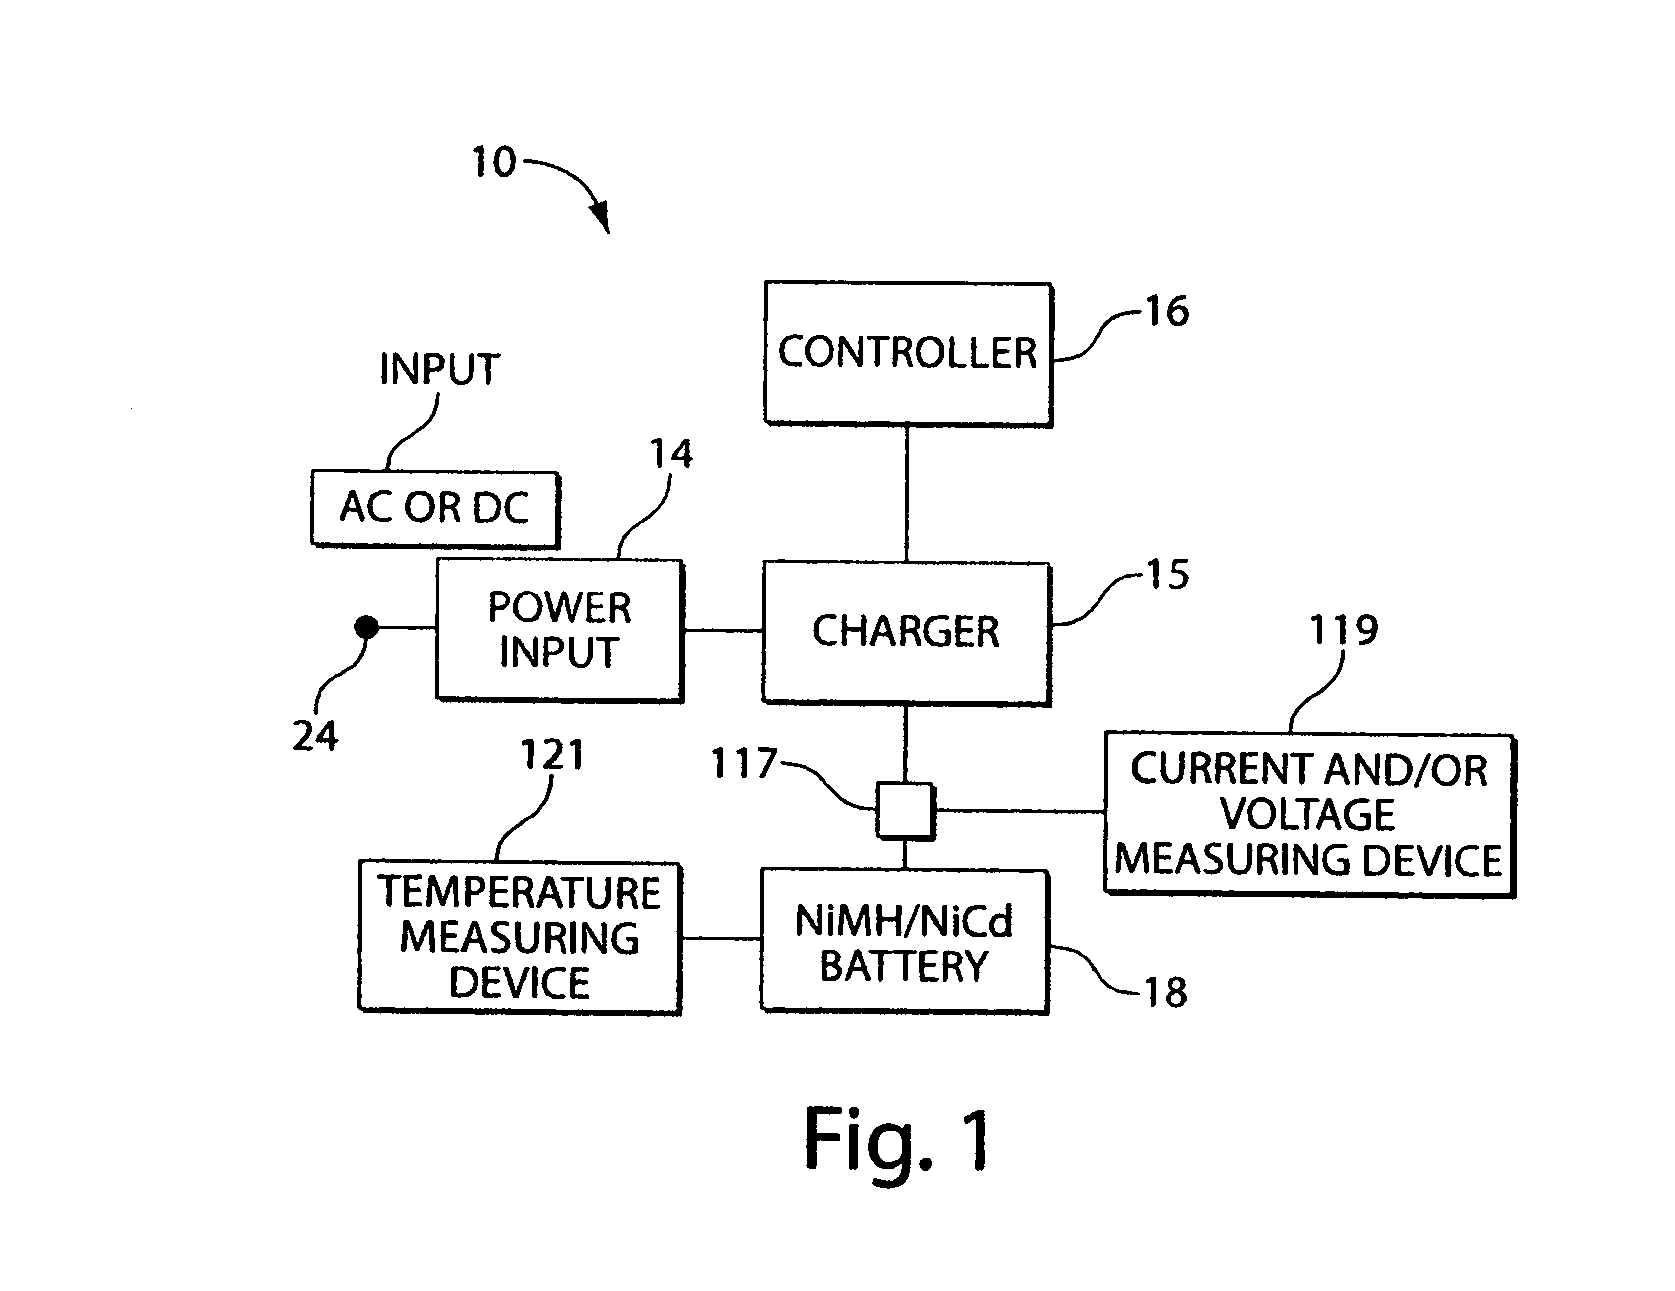 Method and system for charging a NiMH or NiCd battery